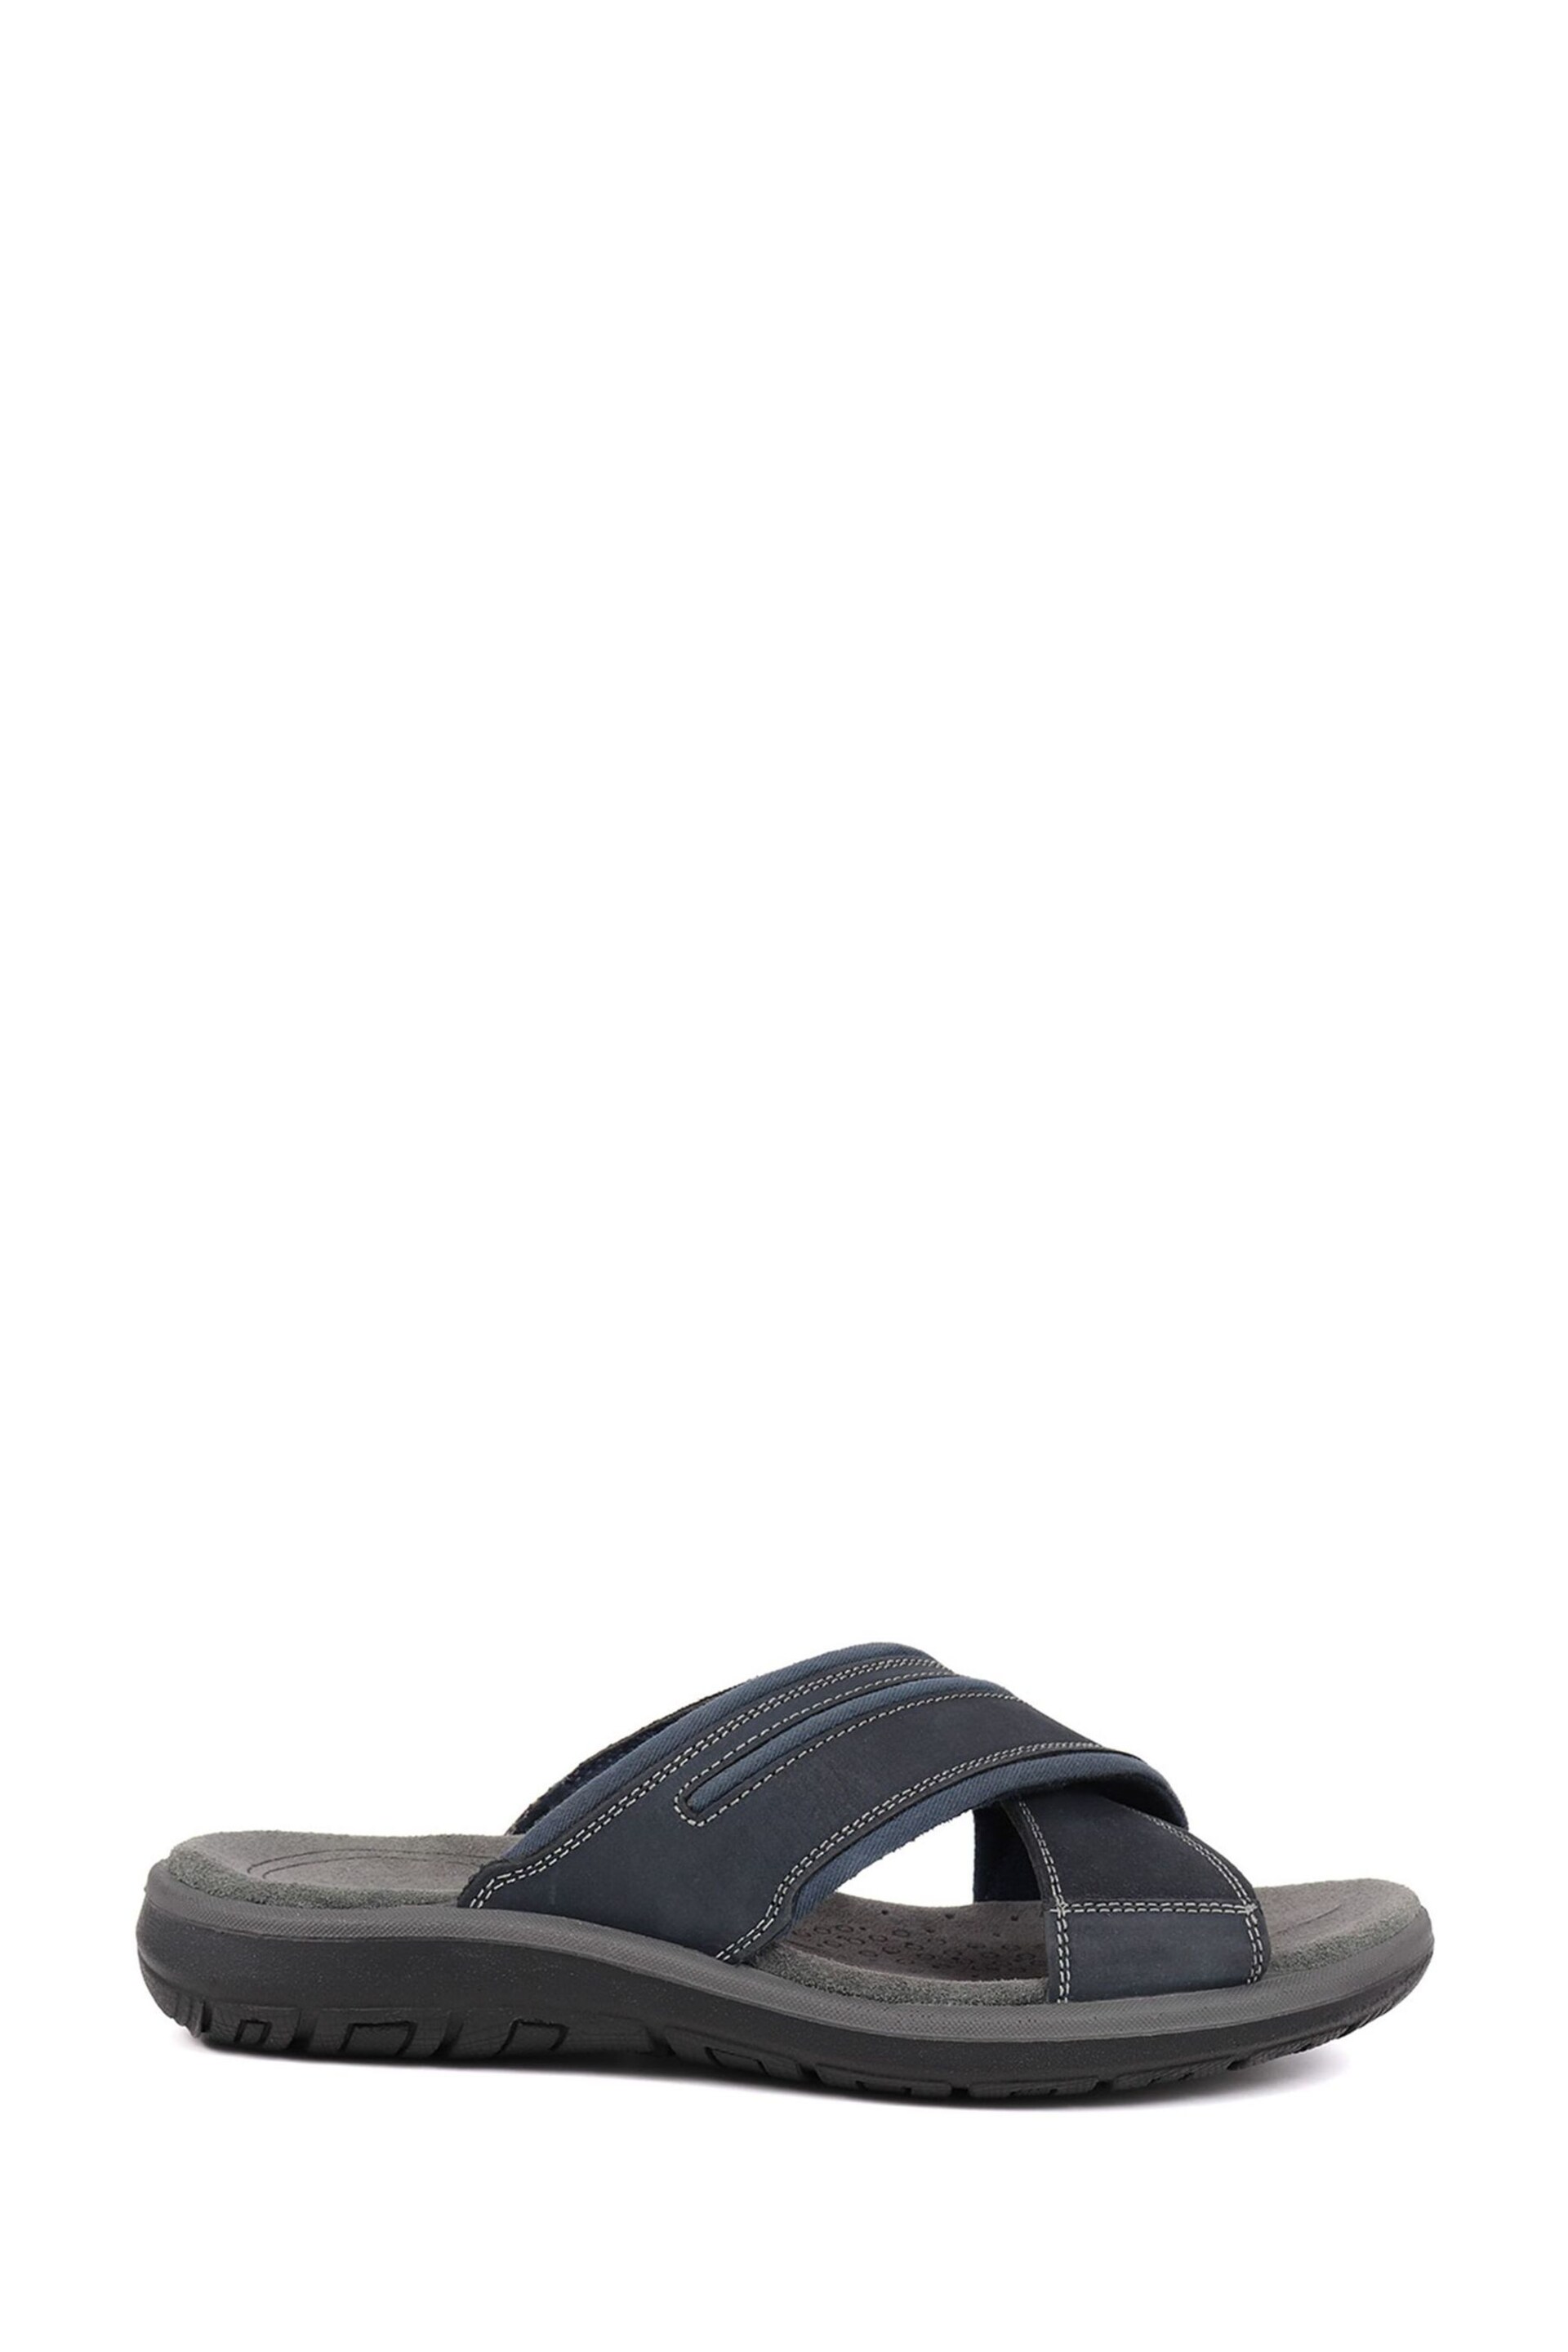 Pavers Blue Slip On Leather Mule Sandals - Image 1 of 5